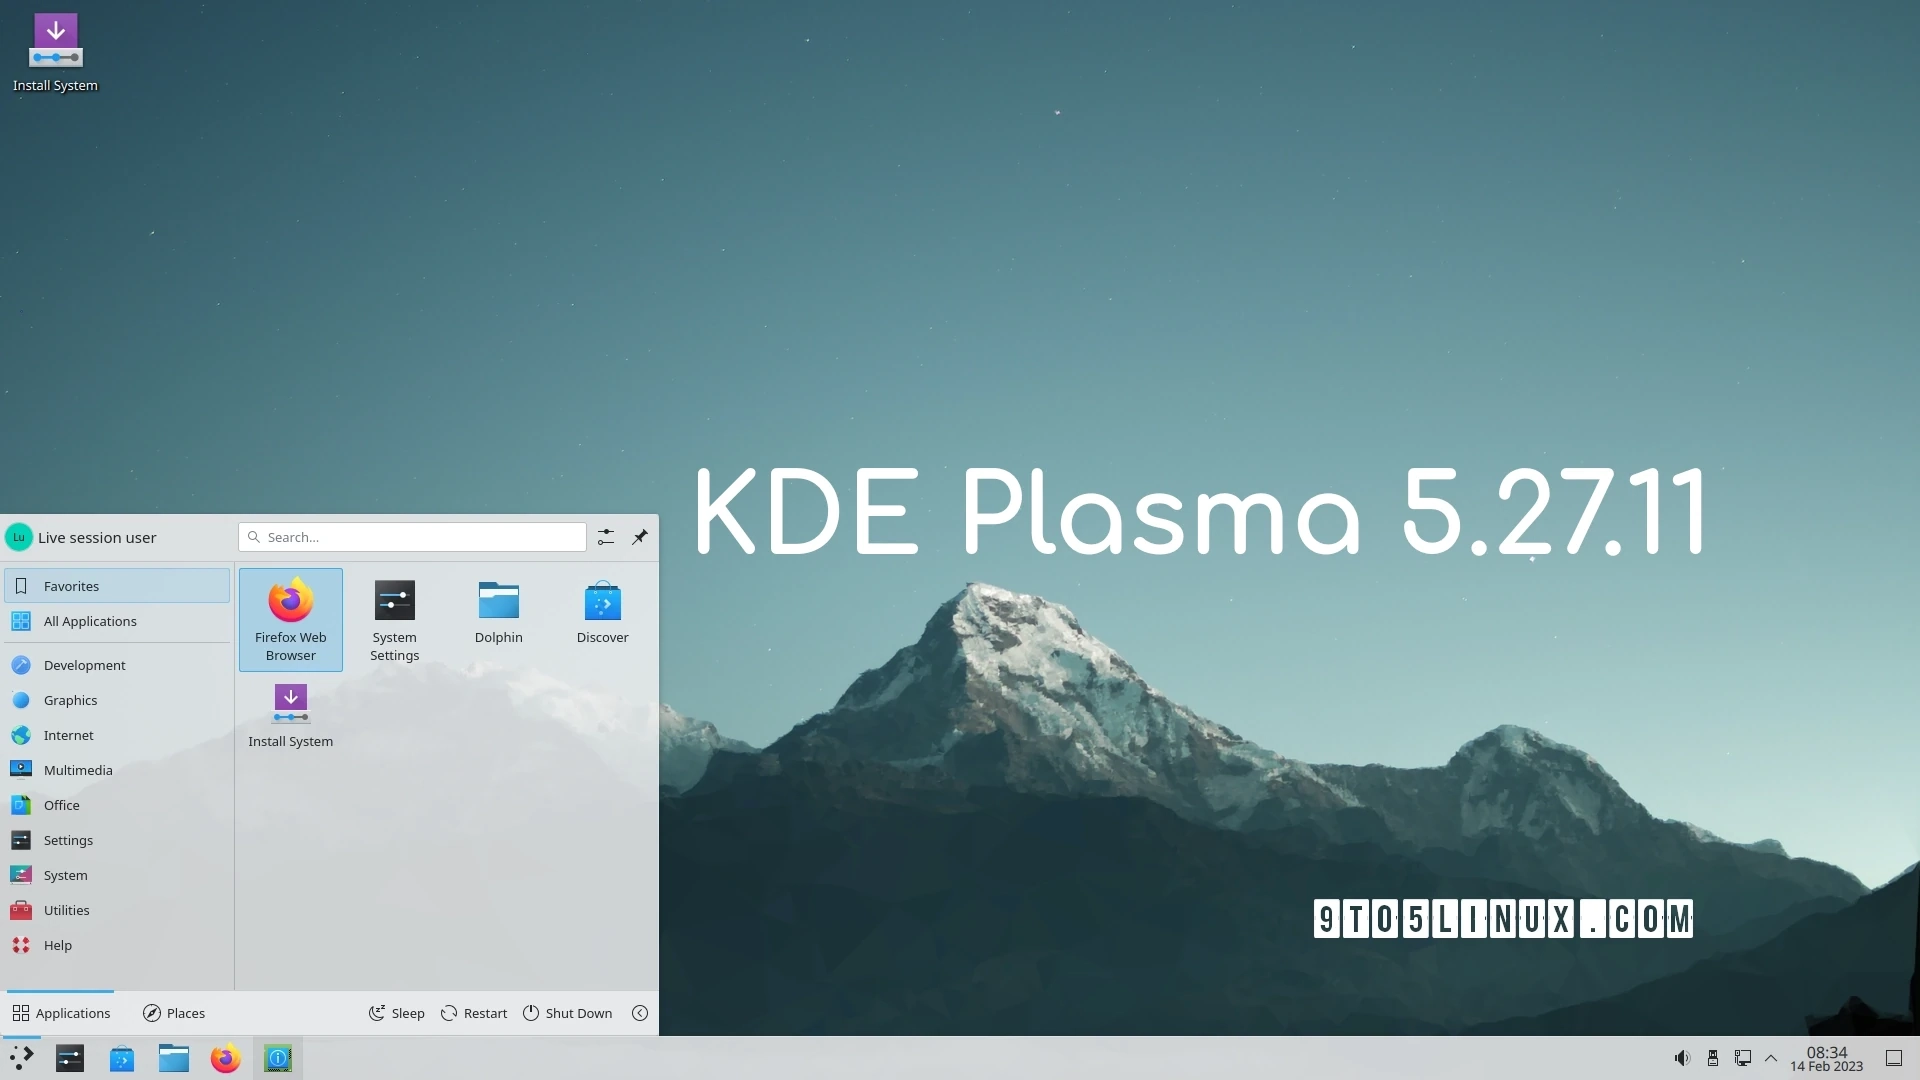 Resolving Flatpak Support in Discover and Plasma Wayland: An Overview of KDE Plasma 5.27.11 LTS Fixes